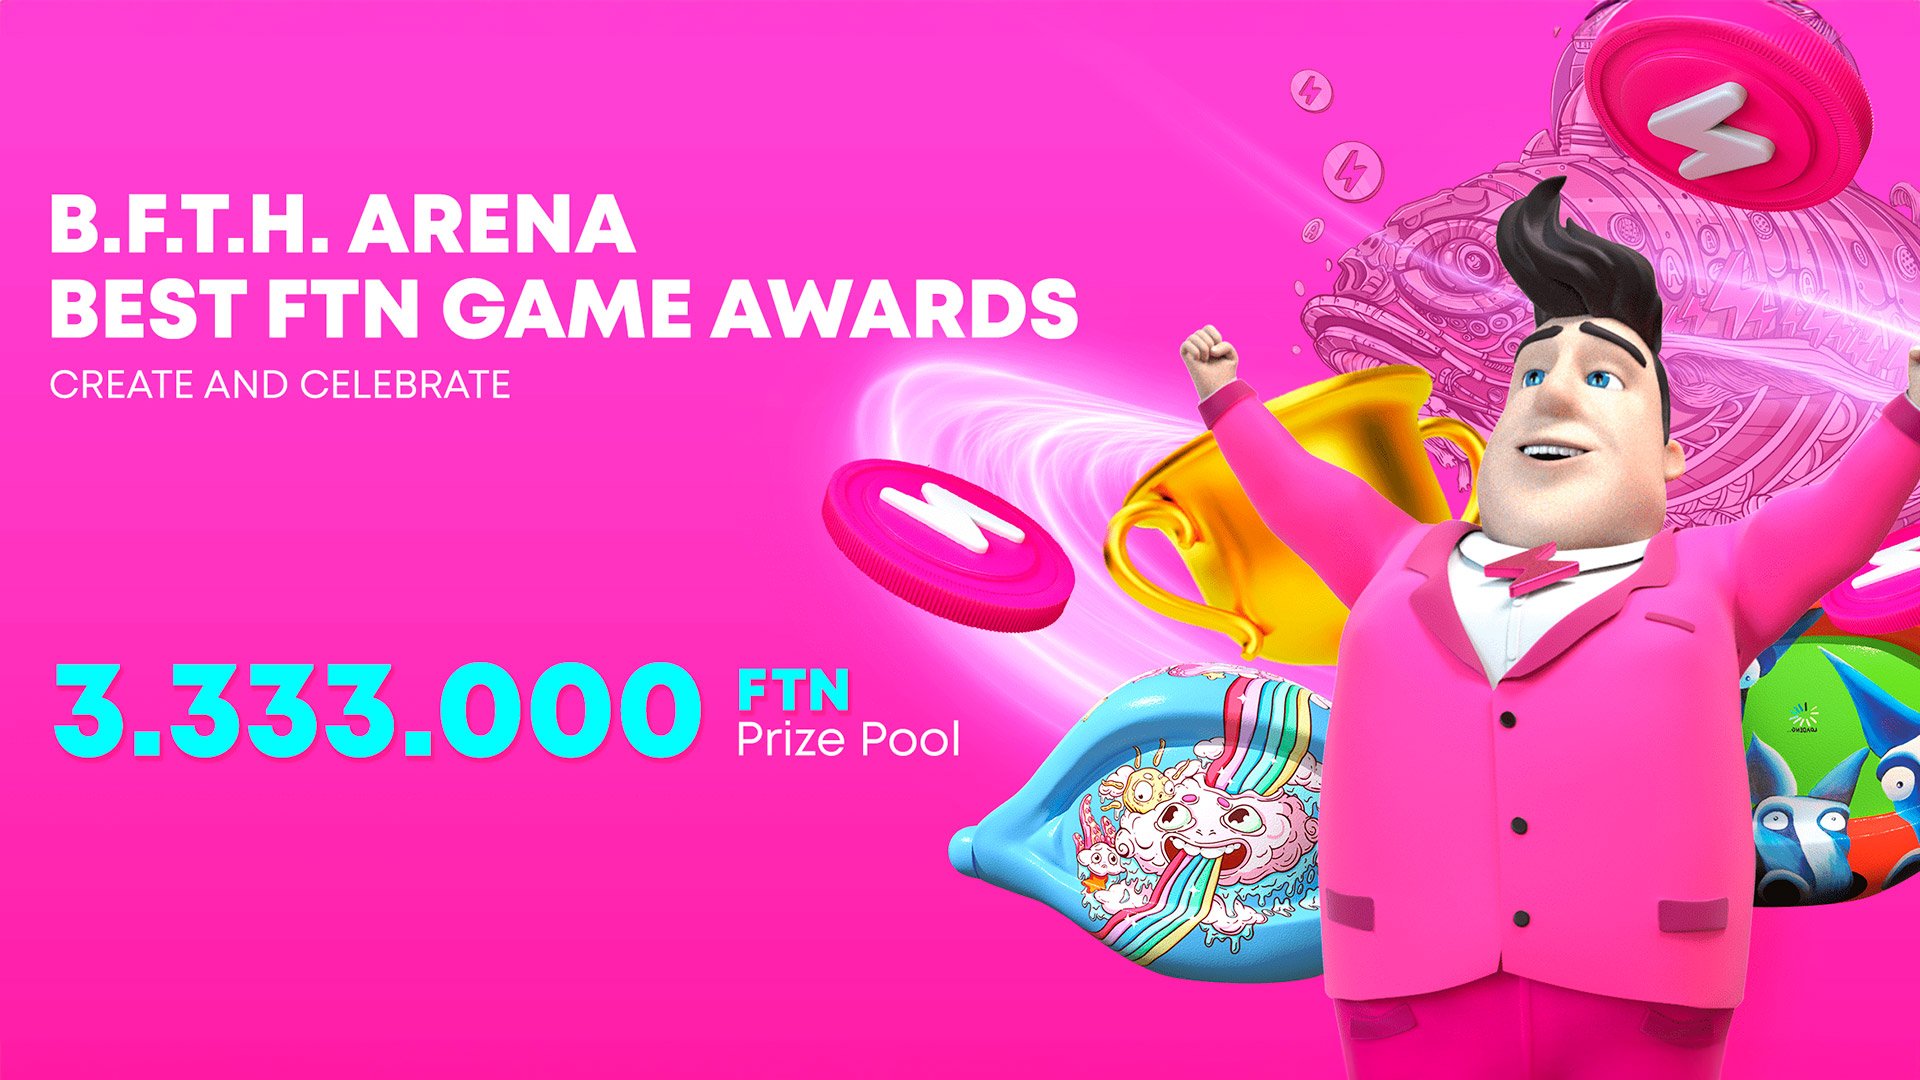 BetConstruct unveils categories for 3.3 million FTN prize pool game awards